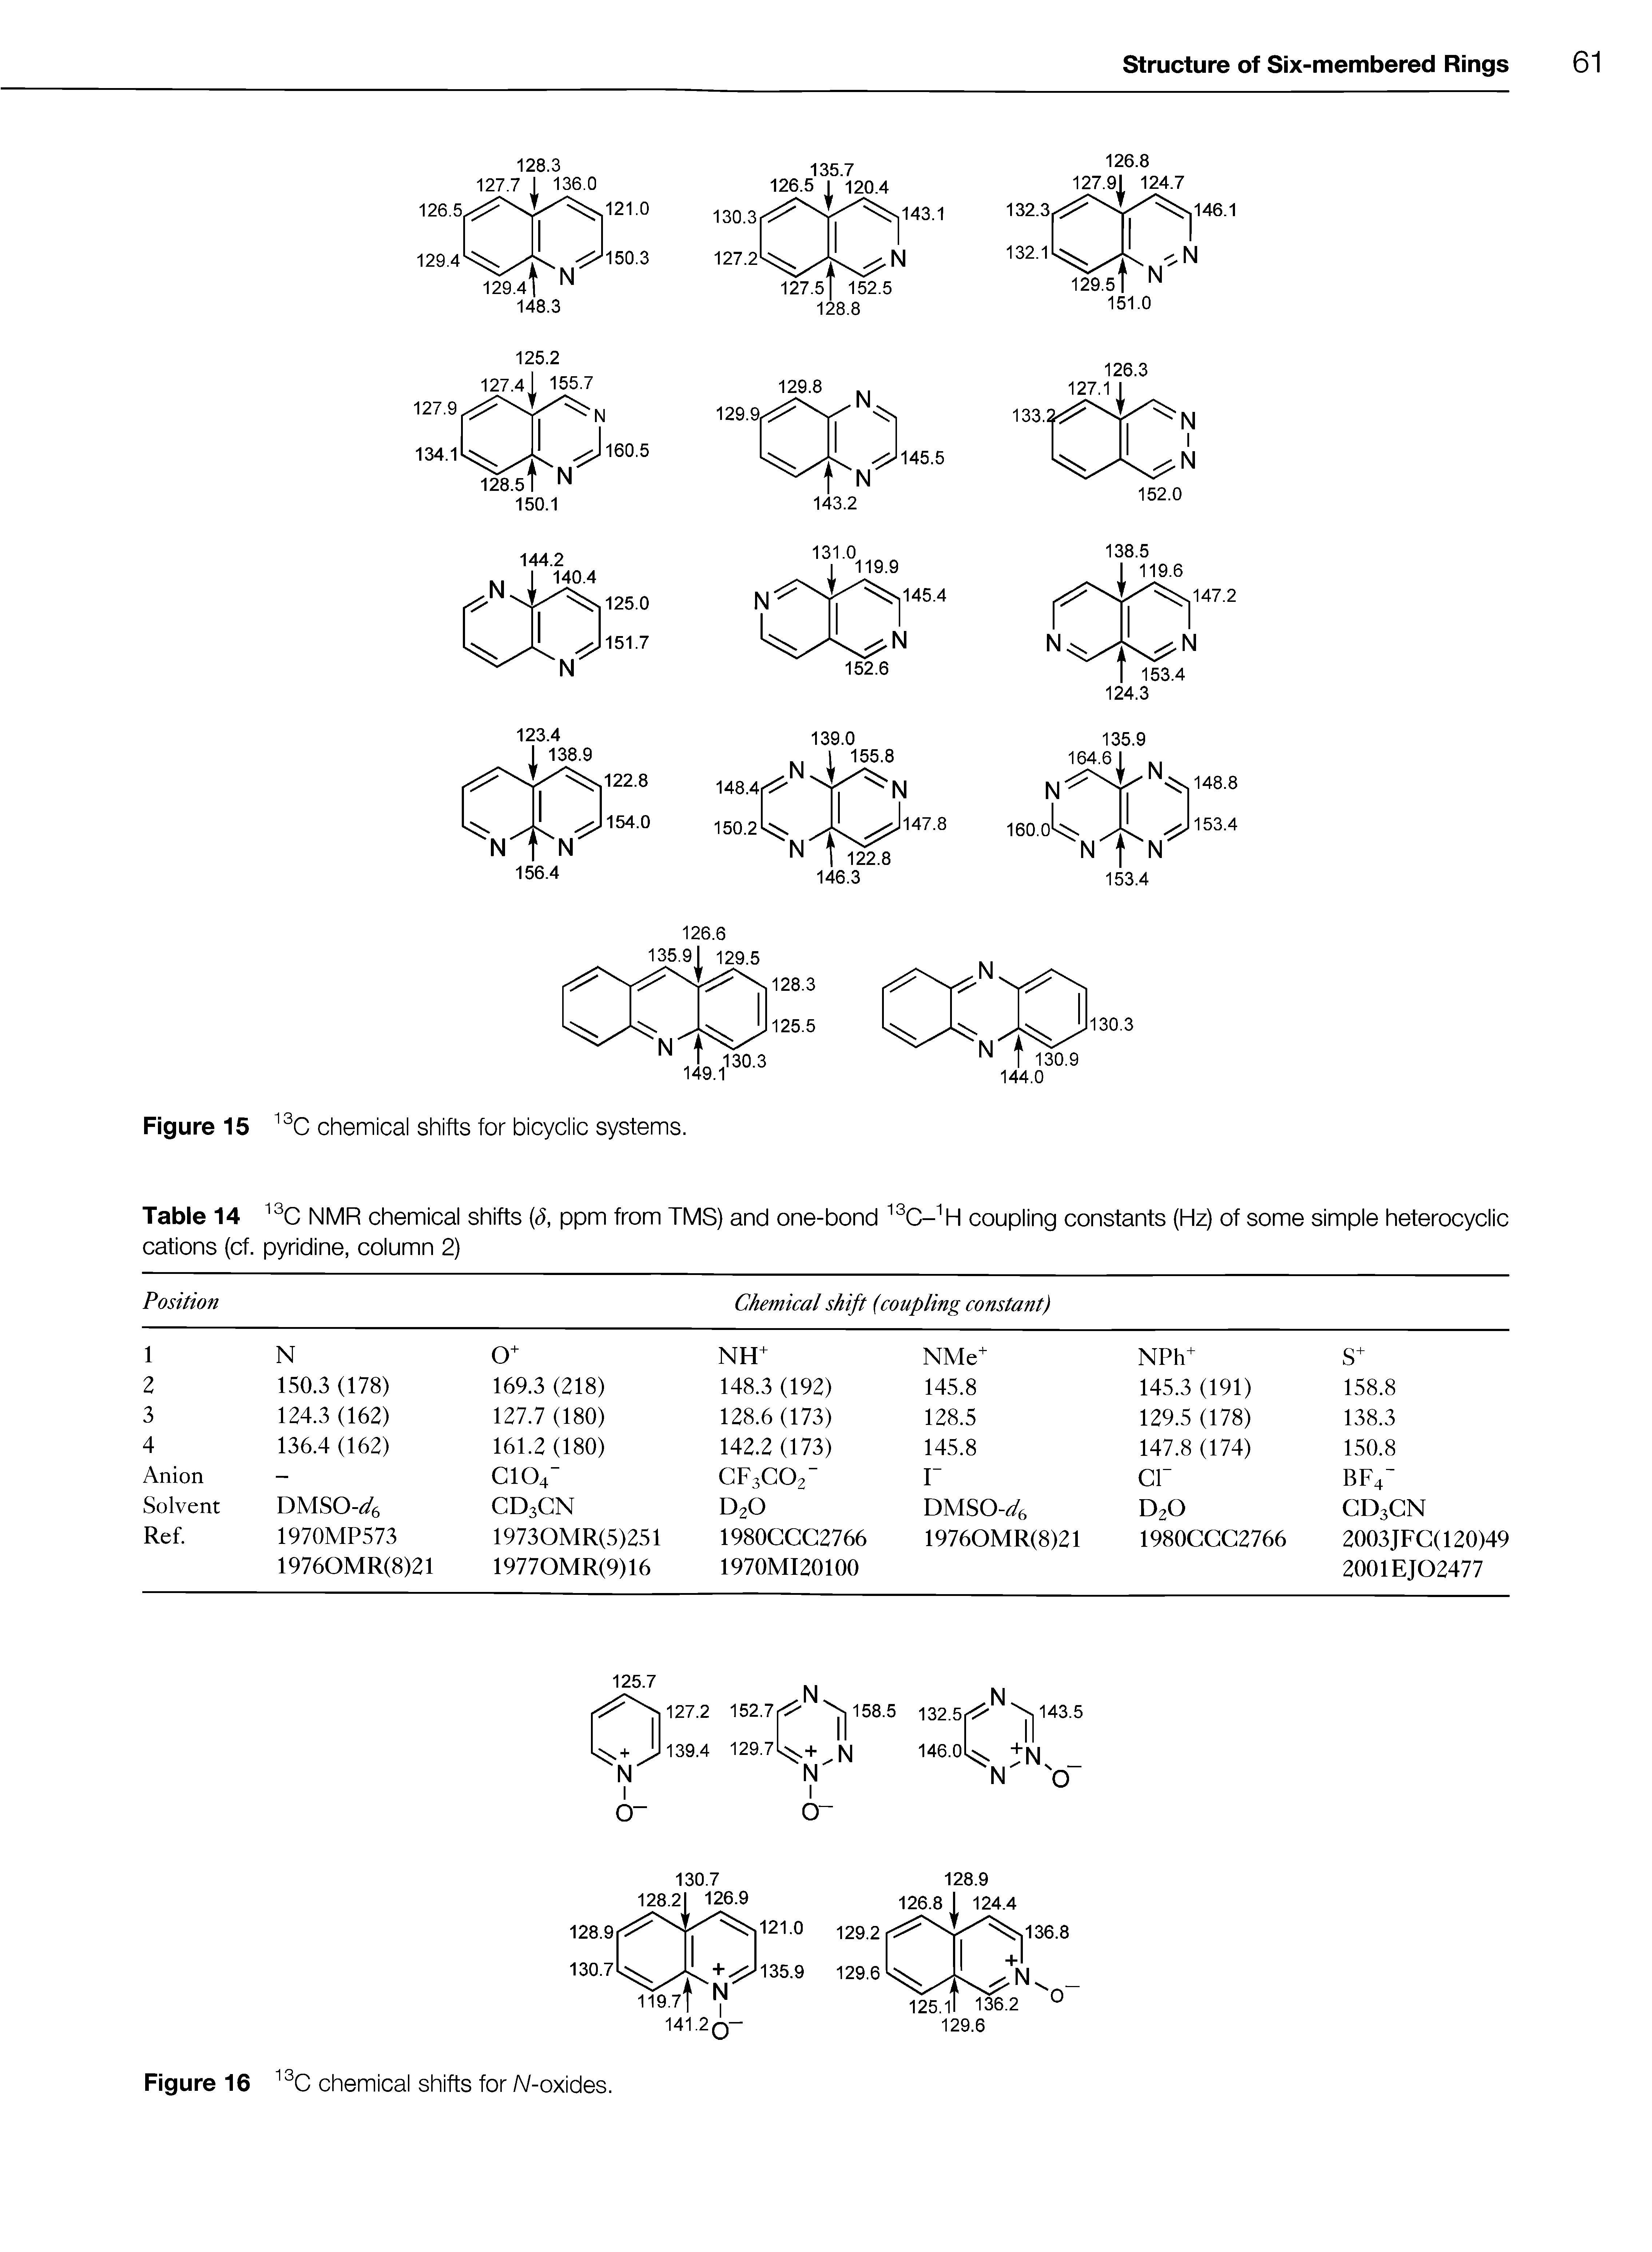 Table 14 13C NMR chemical shifts (S, ppm from TMS) and one-bond 13C-1H coupling constants (Hz) of some simple heterocyclic cations (cf. pyridine, column 2)...